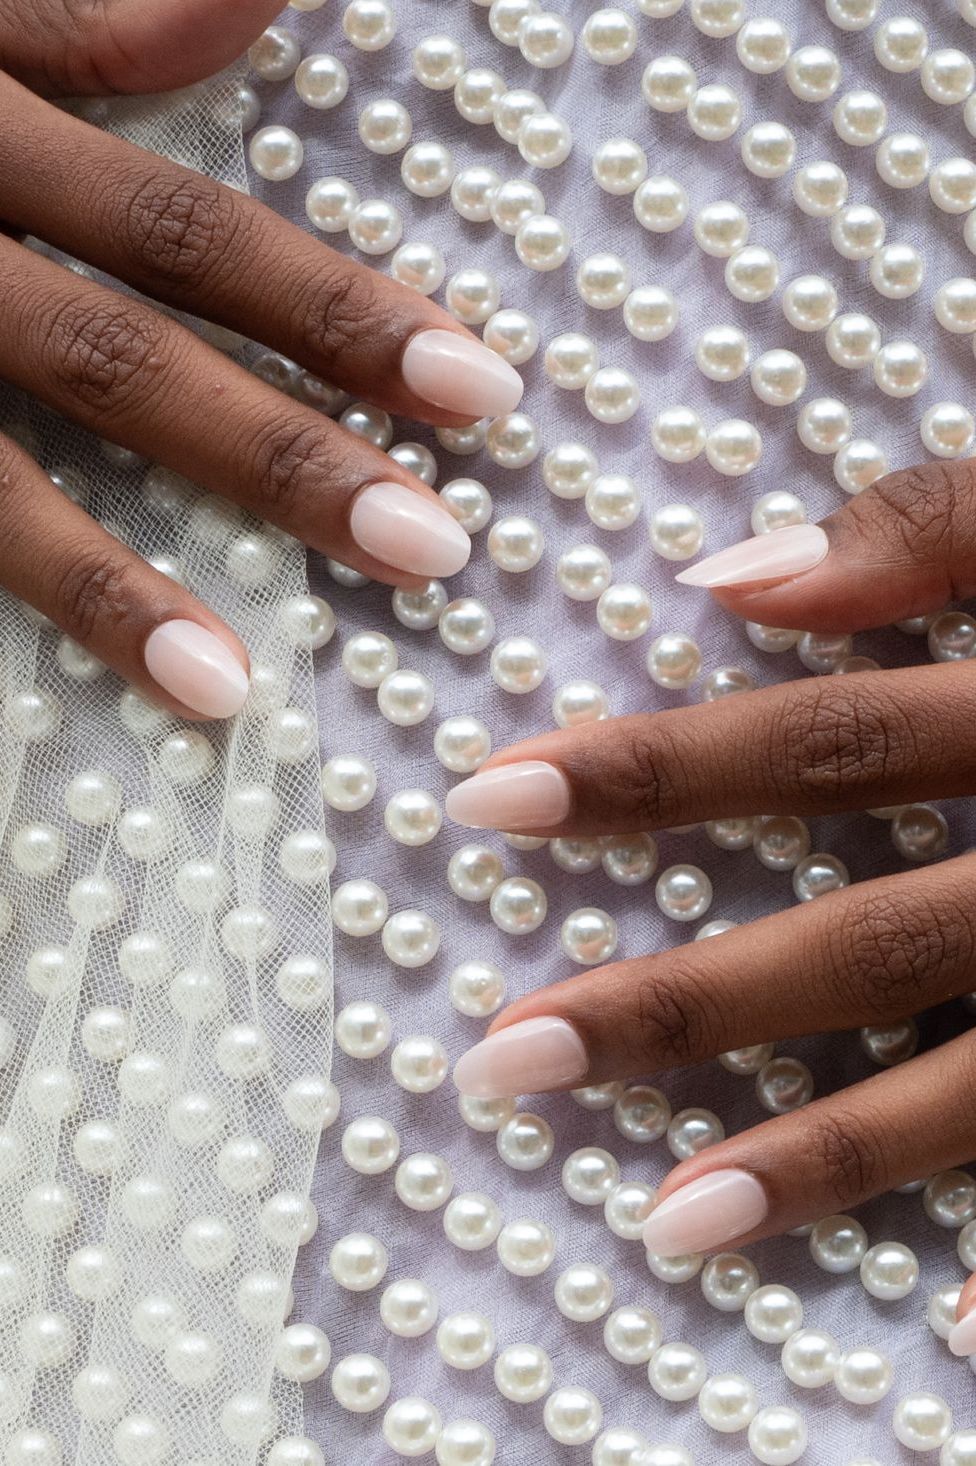 Chrome Nails are Spring's Cool-Girl Manicure Trend for 2023